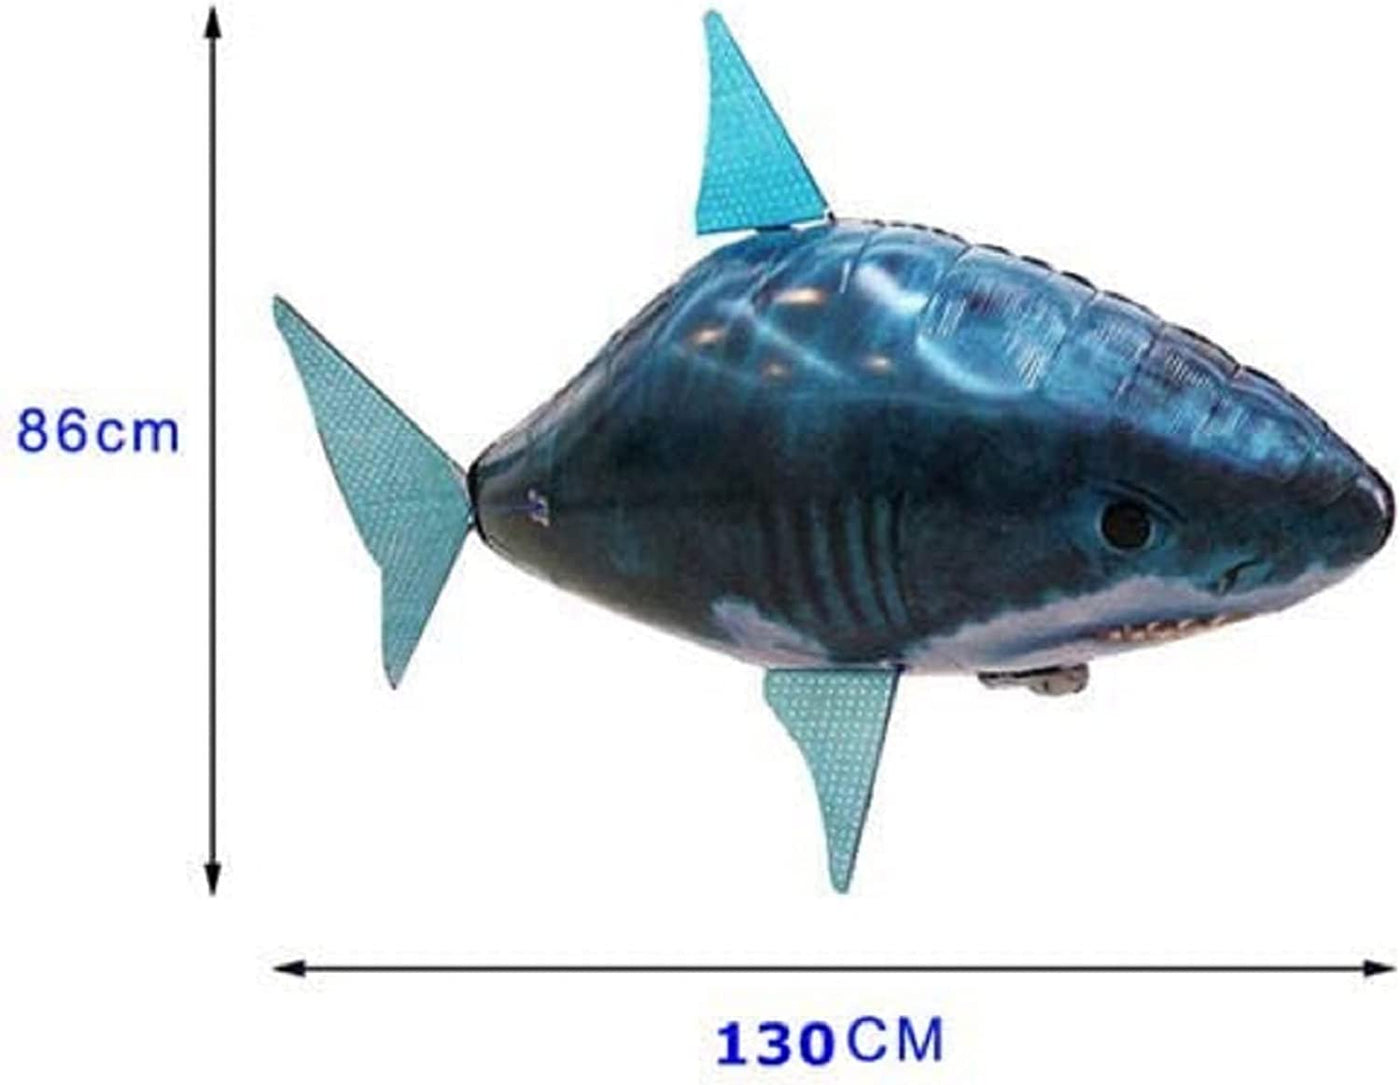 RC Shark Inflatable Balloon Toy